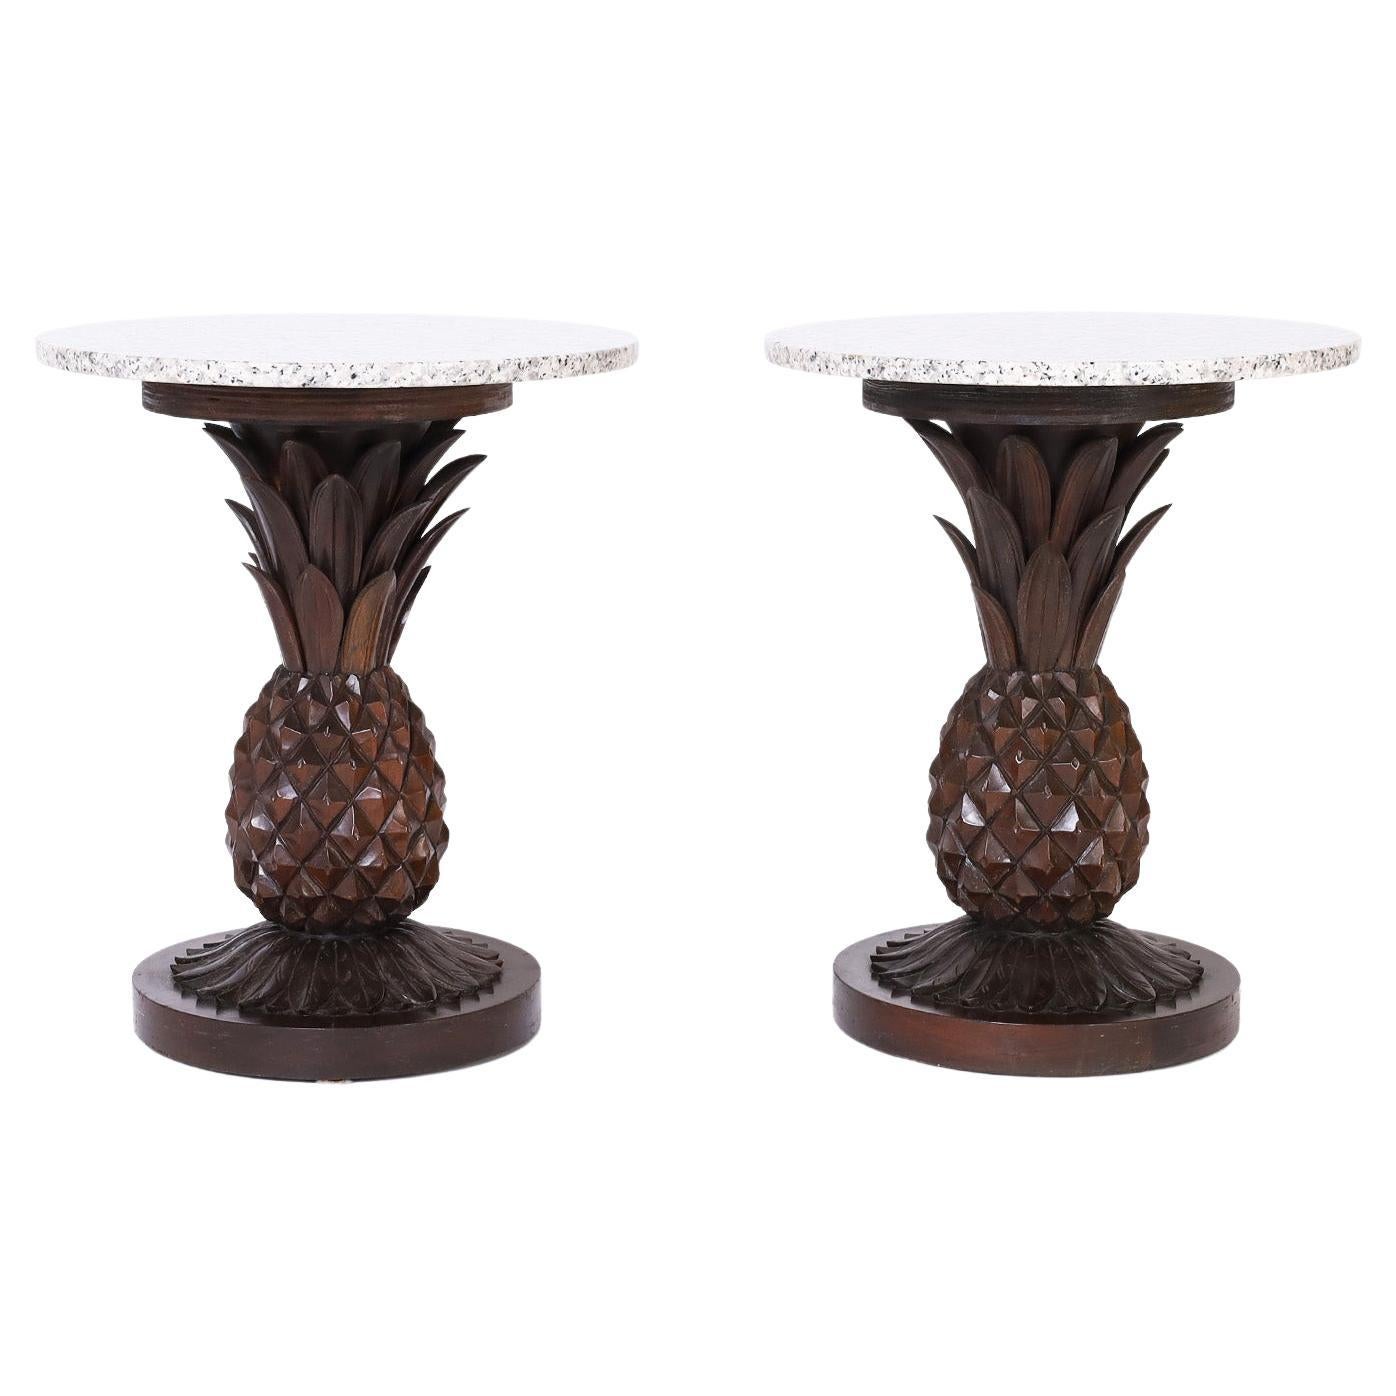 Pair of Carved Wood Pineapple Stands